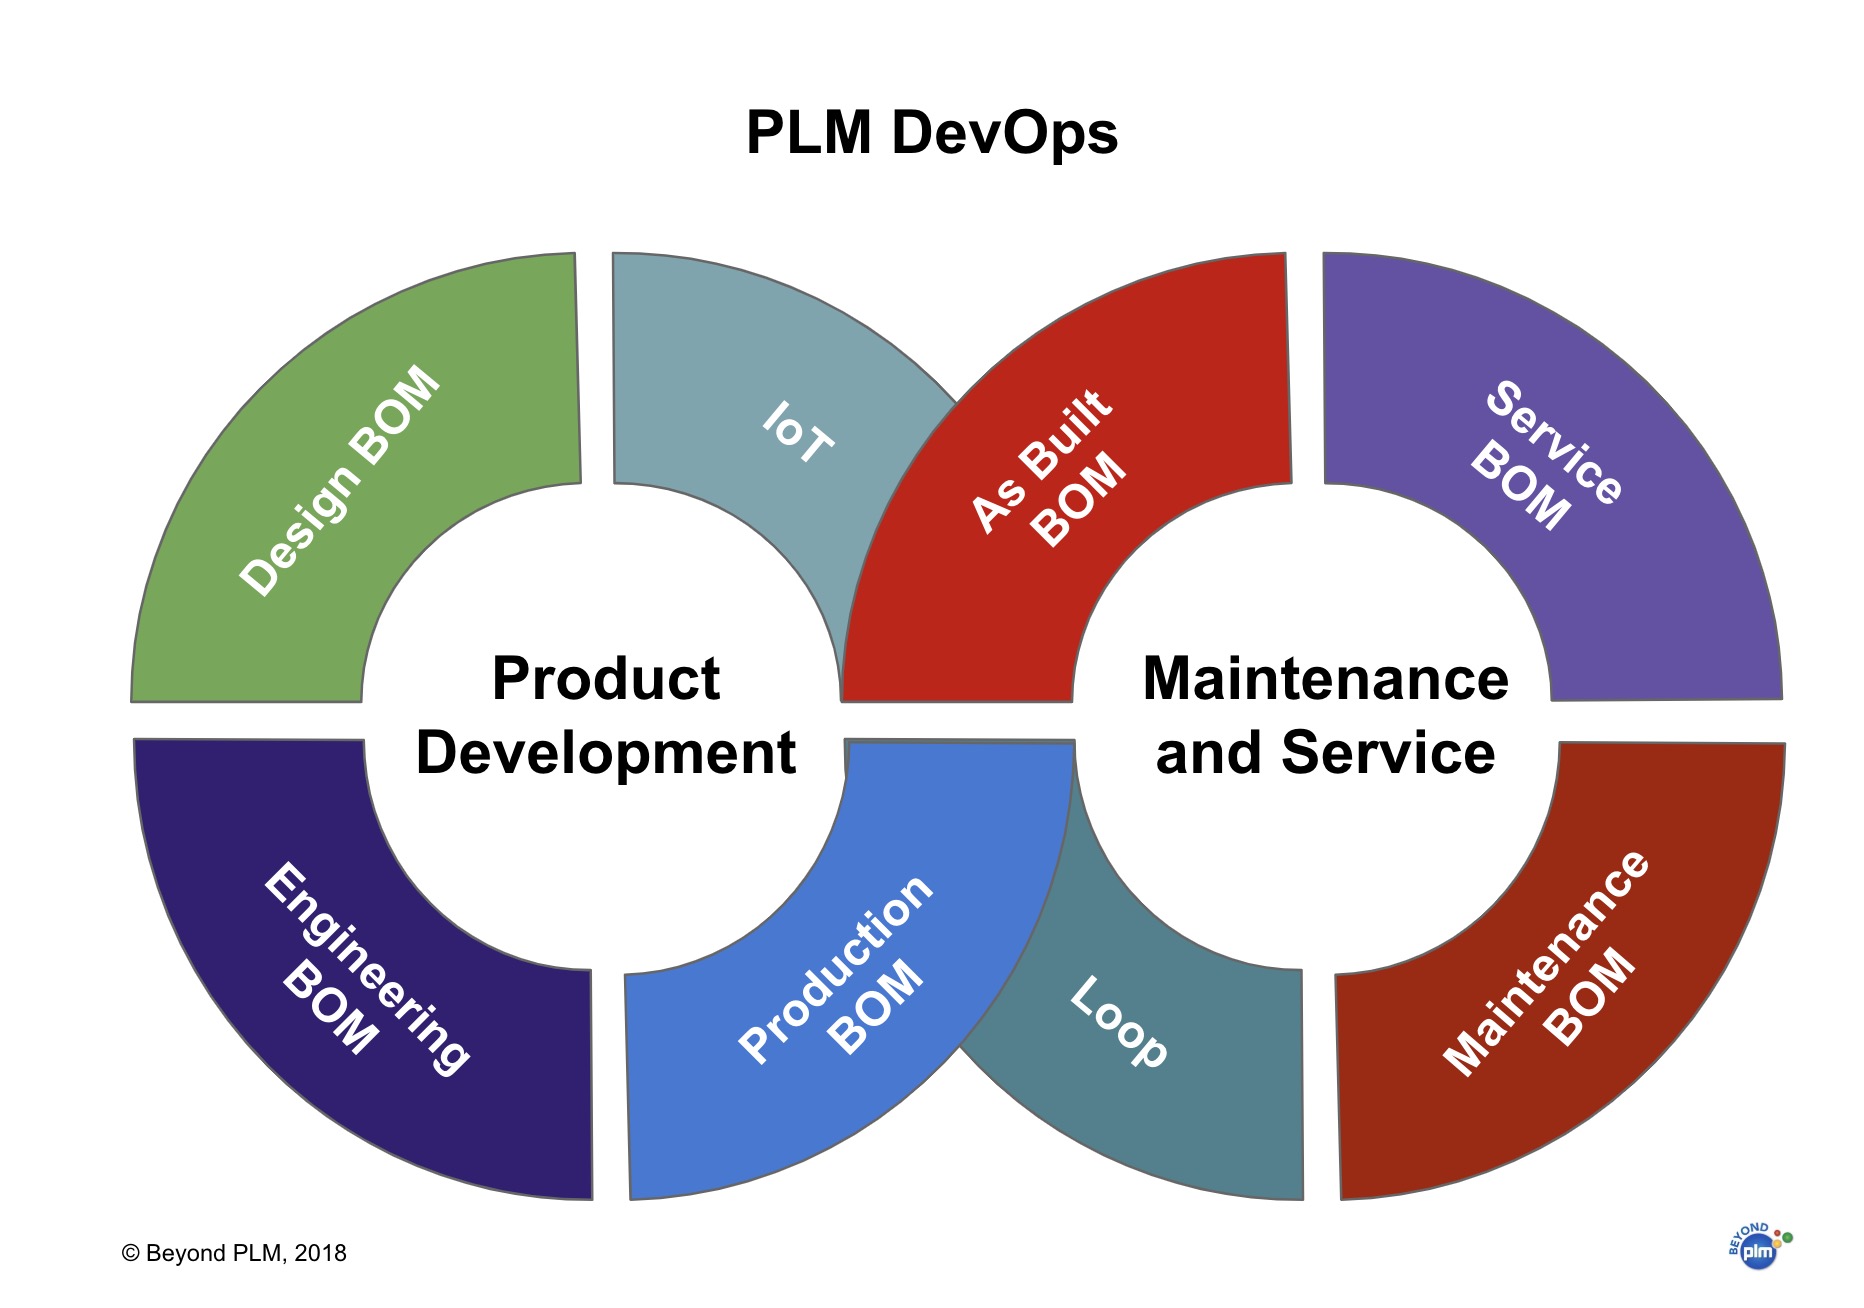 Beyond PLM (Product Lifecycle Management) Blog DevOps is a new PLM ...